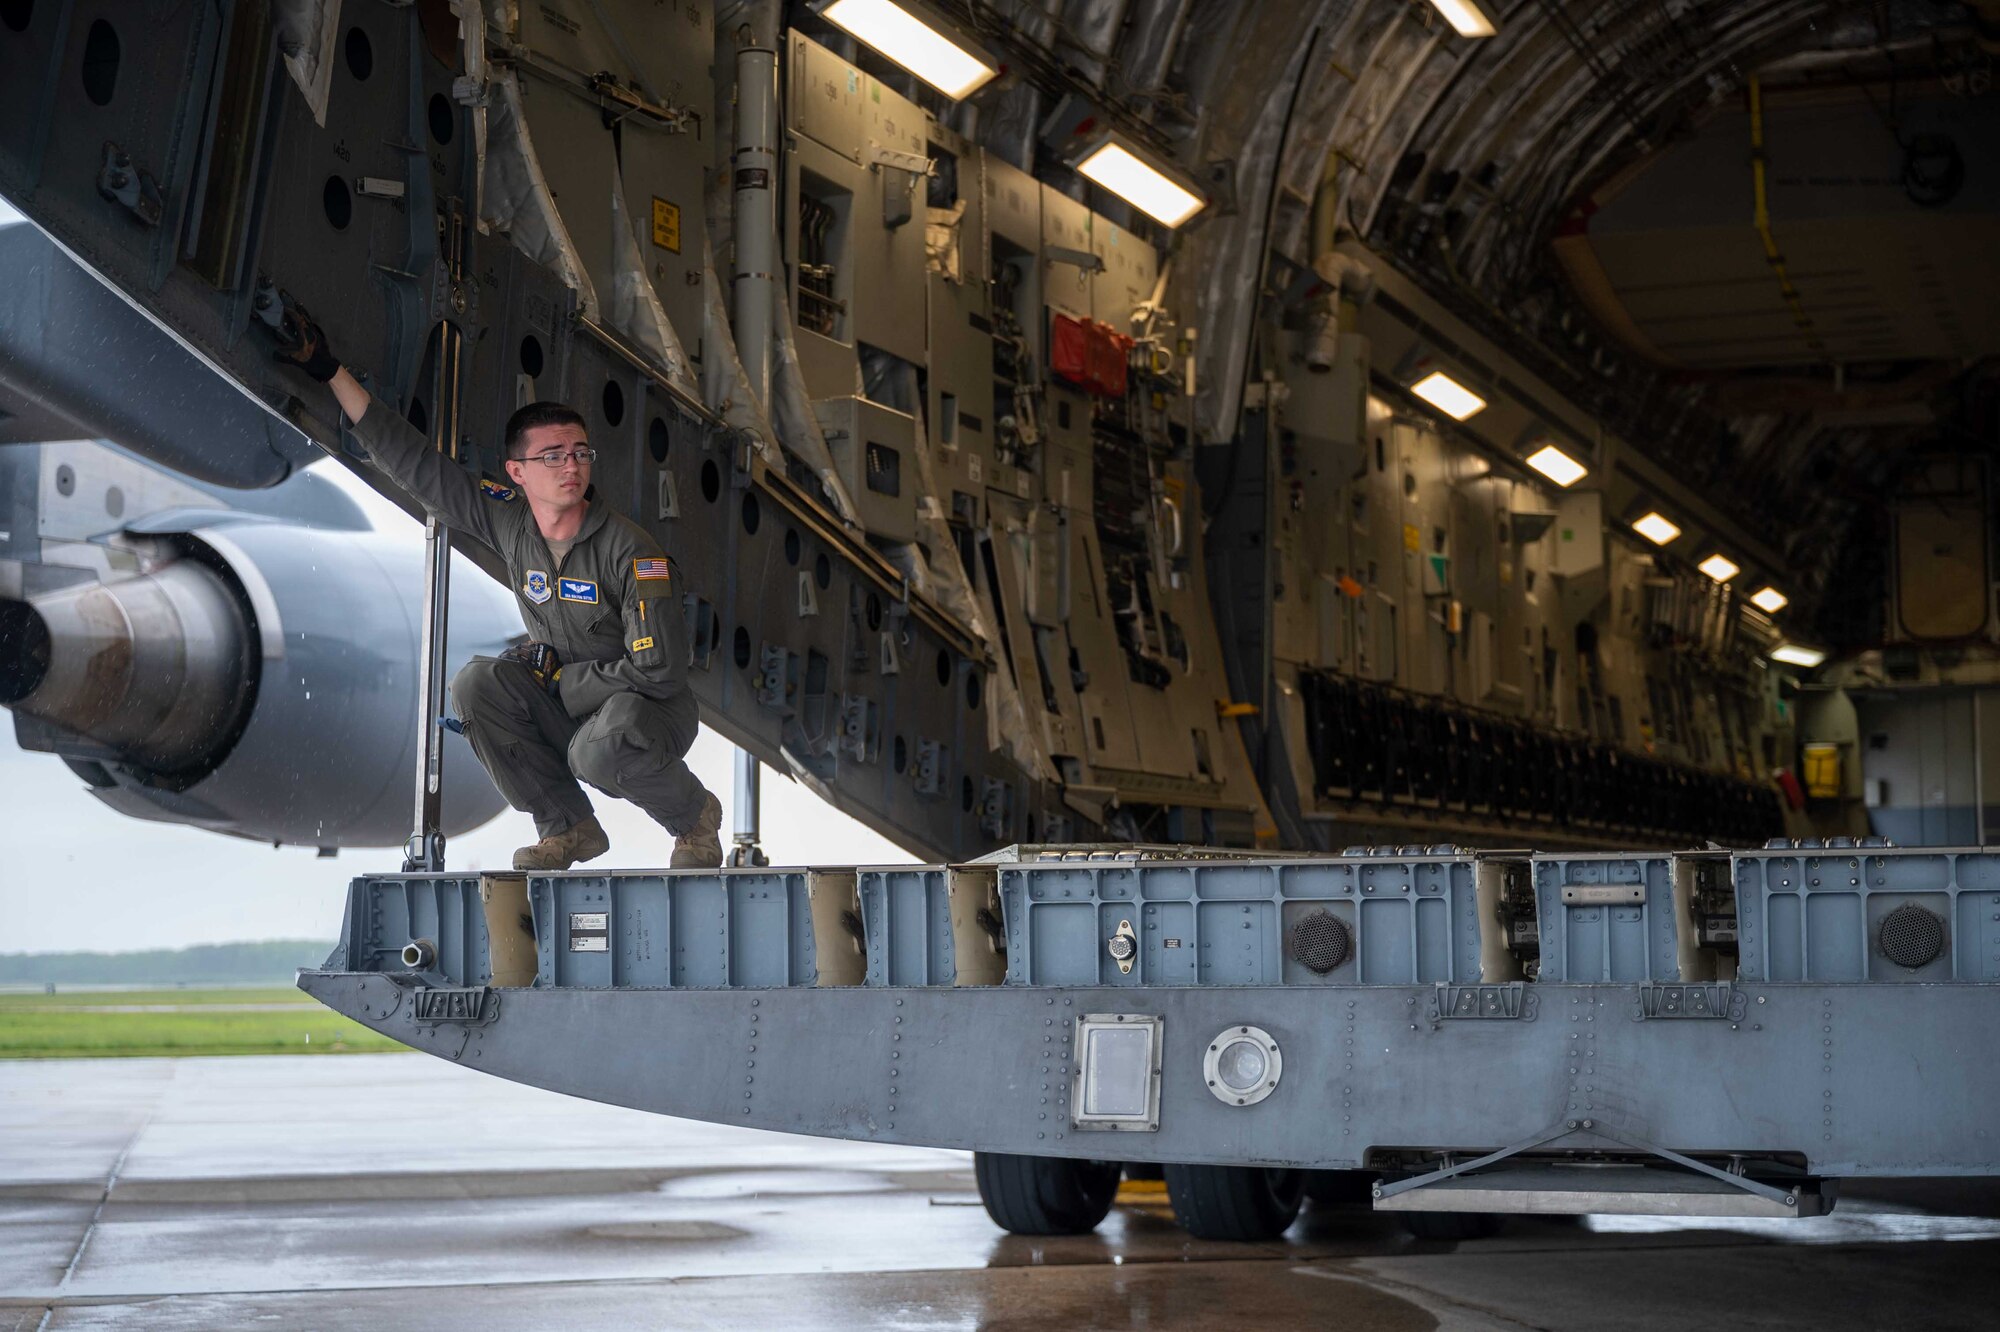 Senior Airman Kolton Sittig, 3rd Airlift Squadron loadmaster, awaits cargo during a local training mission at Dover Air Force Base, Delaware, May 24, 2022. The 3rd AS regularly trains to provide global reach and support global engagement with time-critical theater assets. (U.S. Air Force photo by Senior Airman Faith Schaefer)